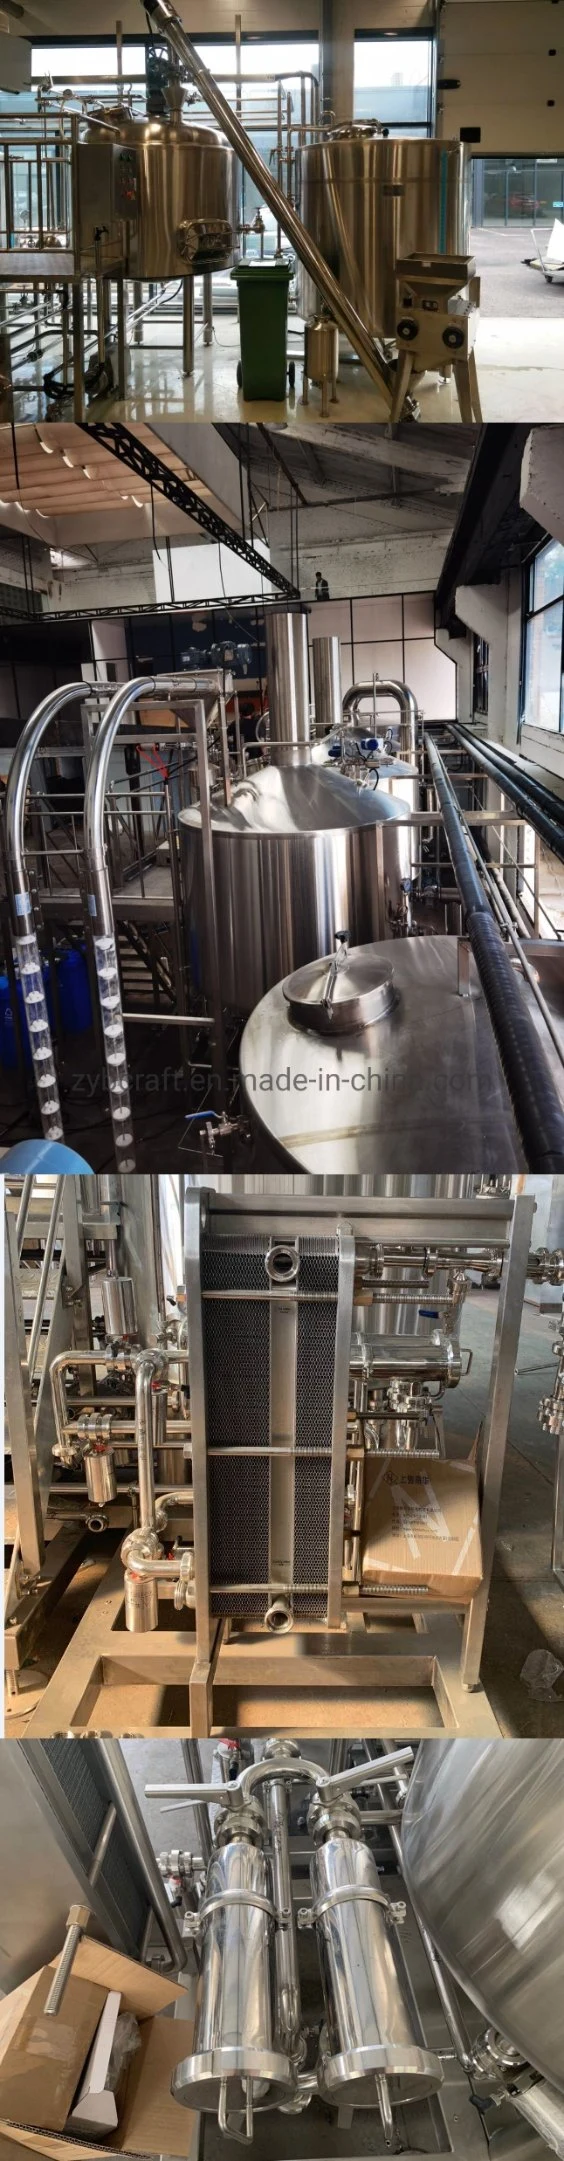 Fermenter Fermenter Price Beer Brewing Equipment Conical Beer Fermenter 20bbl Turnkey Project Micro Brewery